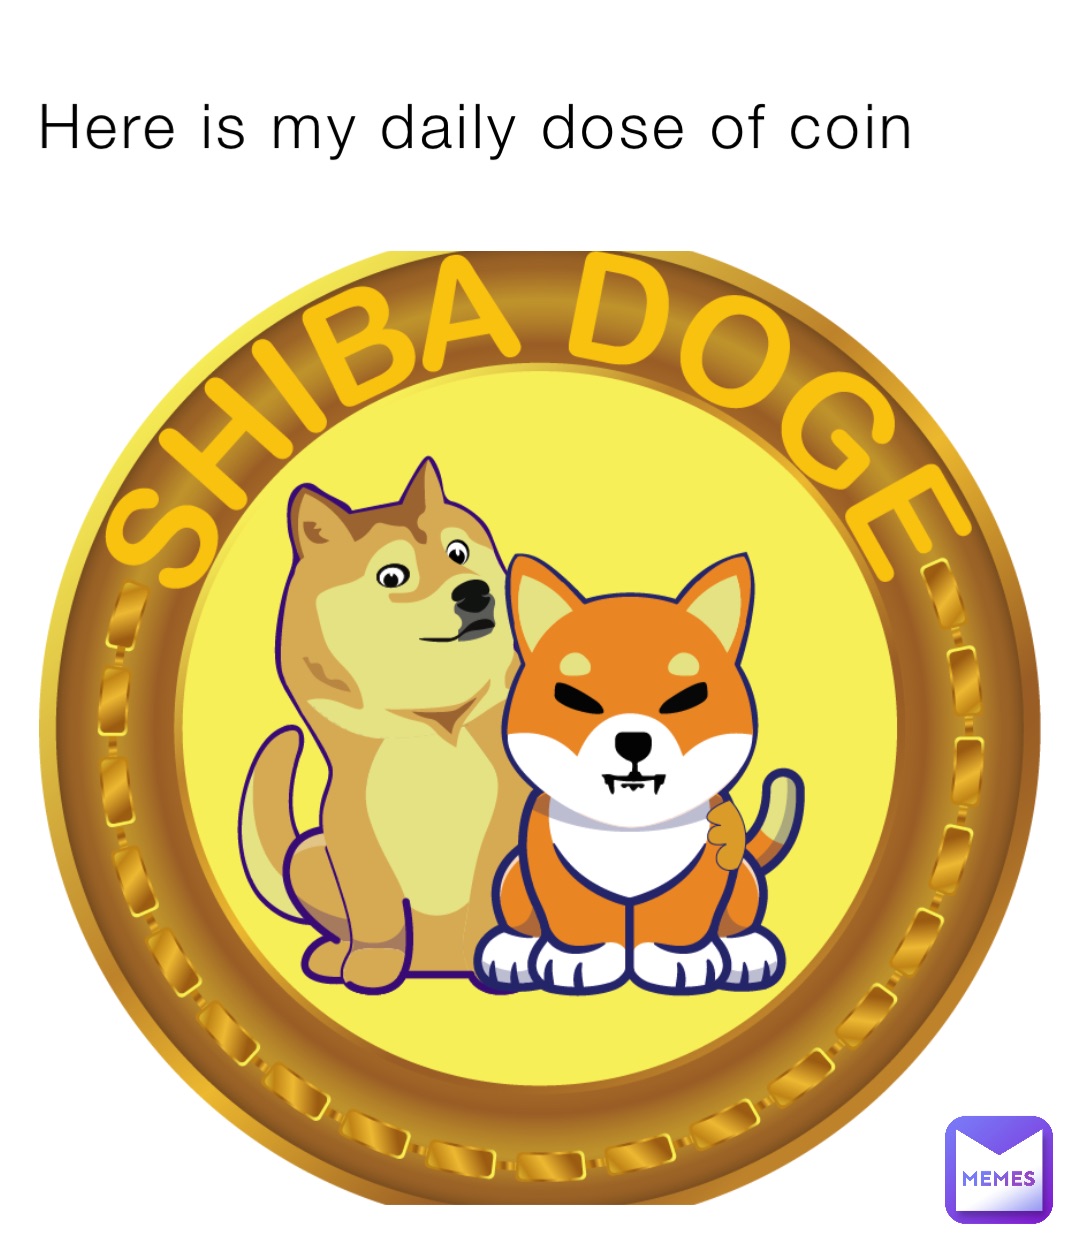 Here is my daily dose of coin